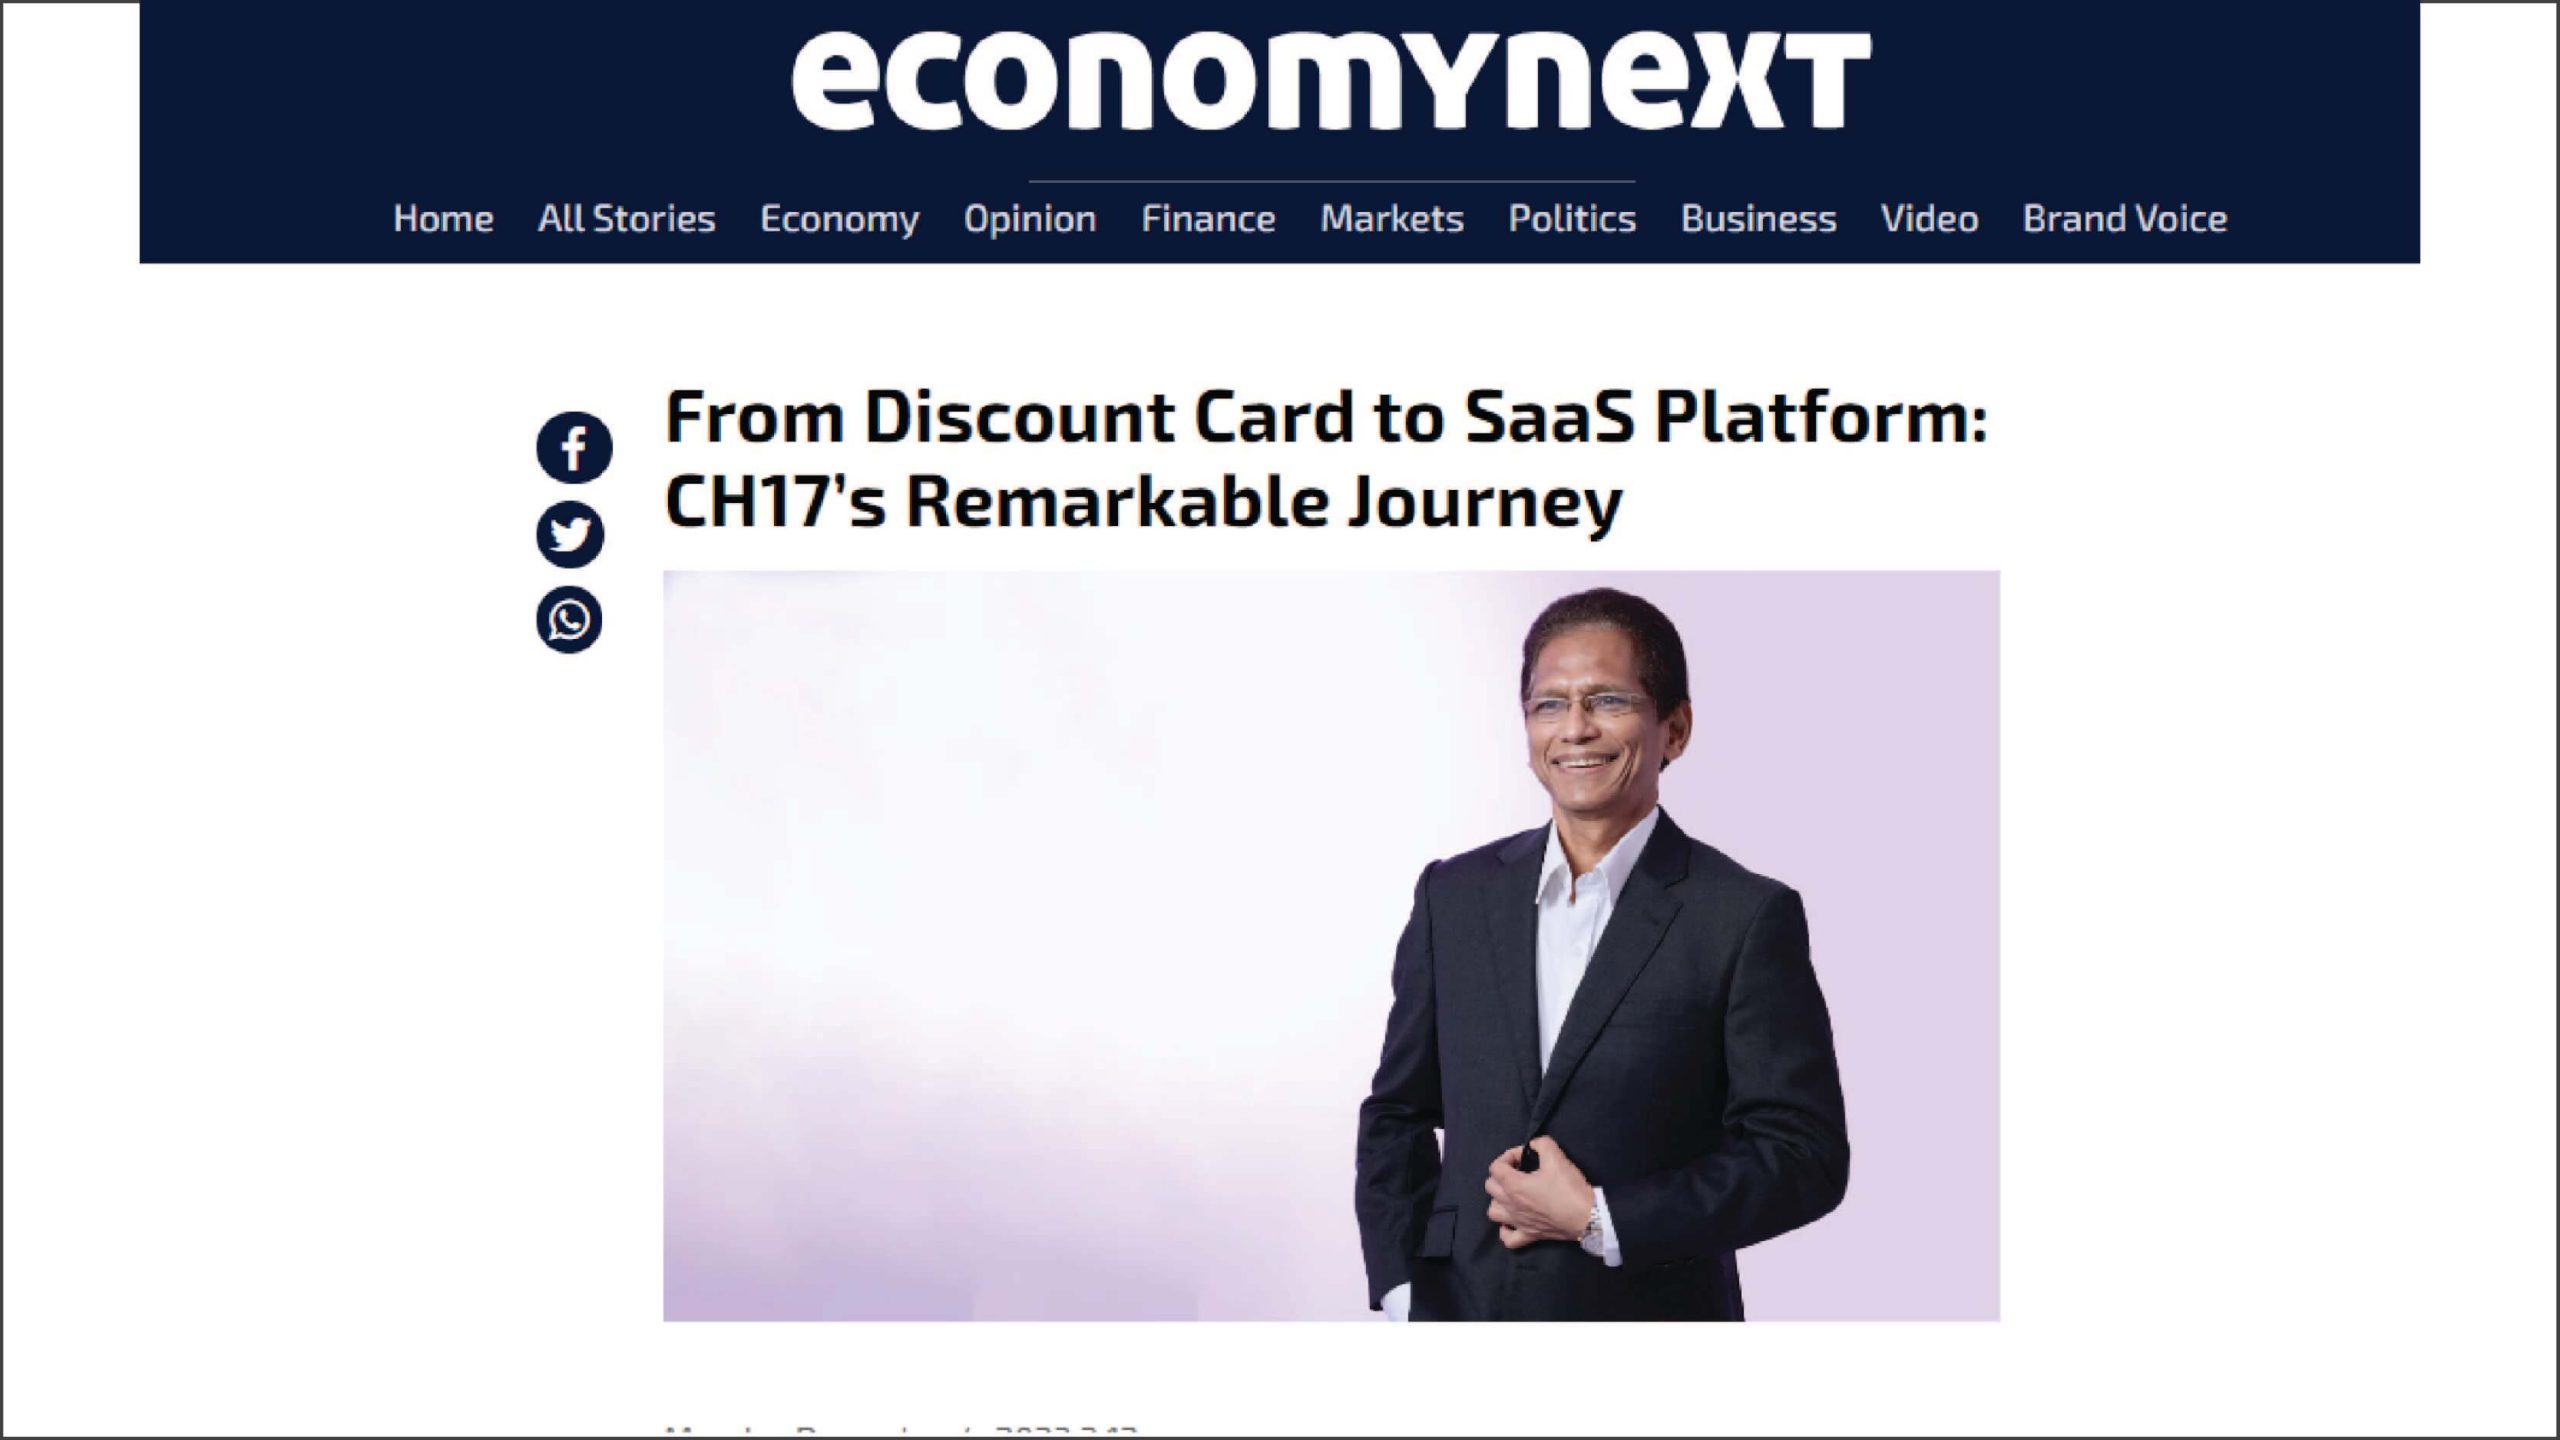 From Discount Card to SaaS Platform: CH17’s Remarkable Journey